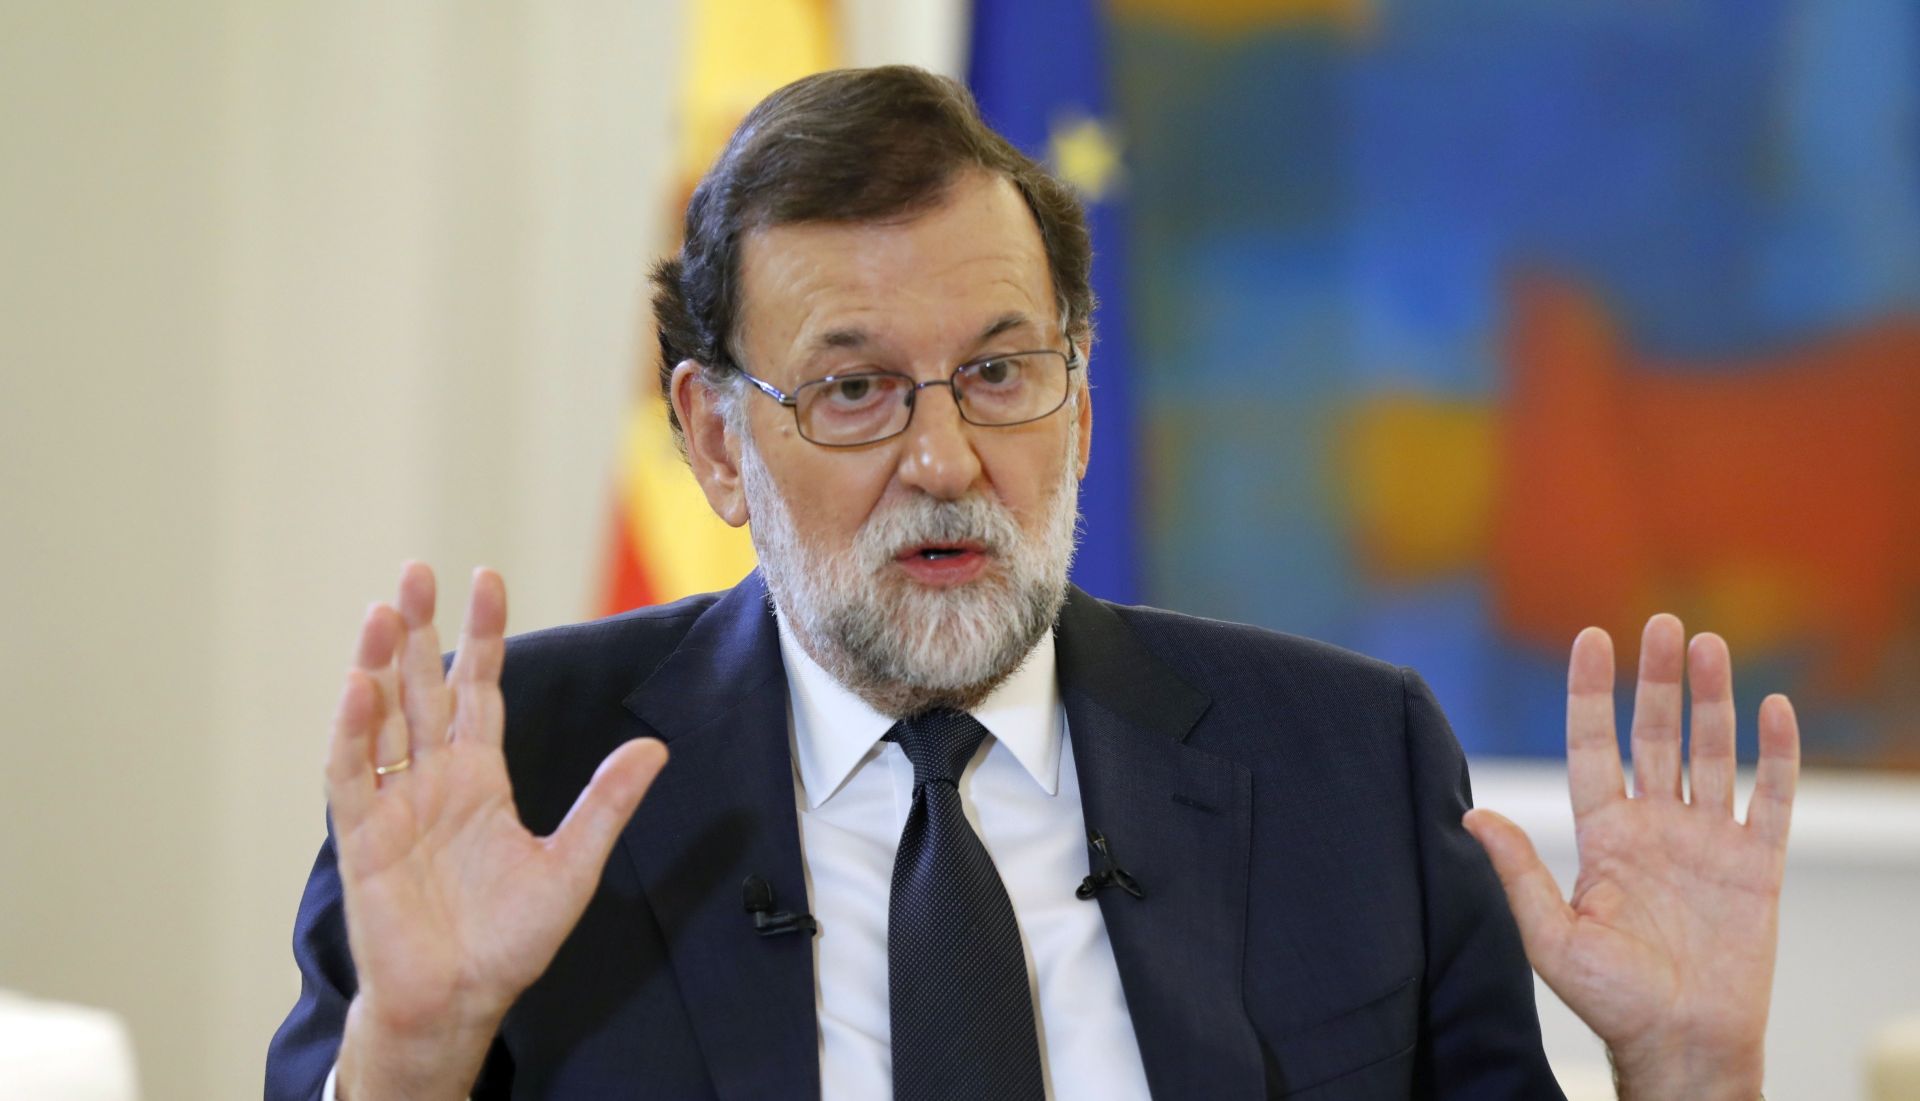 epa06246590 Spanish Prime Minister Mariano Rajoy gestures during an interview with Spanish News Agency Agencia EFE, at La Moncloa Palace in Madrid, Spain, 05 October 2017. Rajoy demanded from Catalonian regional Government President Puigdemont to cancel 'as soon as possible' his project of making an unilateral independence declaration. A vast majority voted 'yes' to a Catalan independence in the referendum held 01 October 2017 that had been banned by the Spanish Constitutional Court and saw national police and civil guards deployed in order to prevent the people from voting.  EPA/Angel Diaz